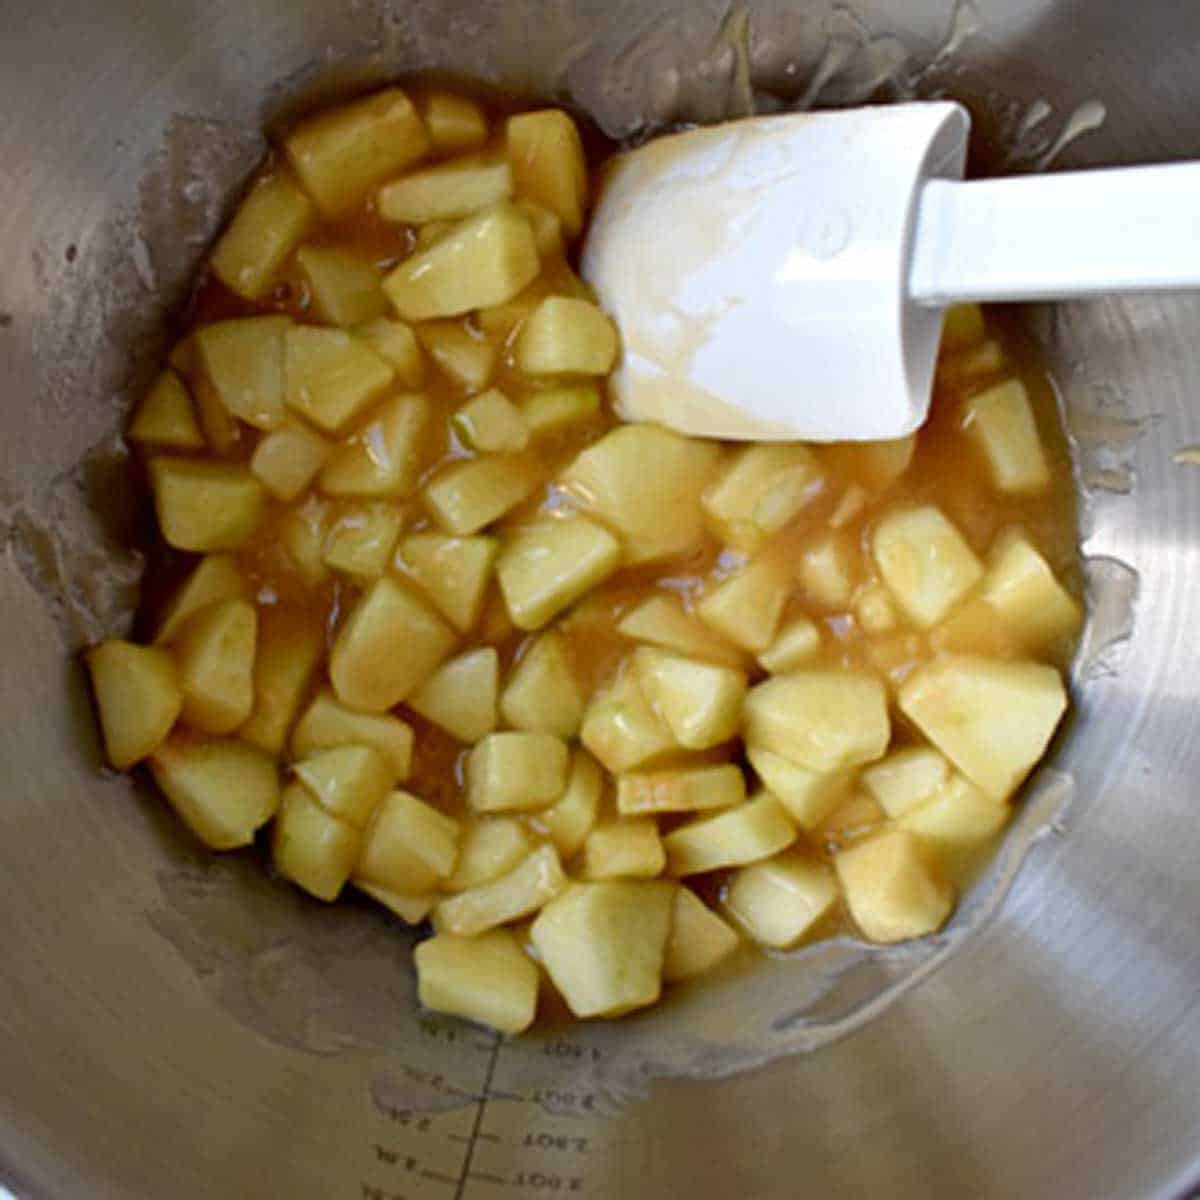 Peeled and diced Granny Smith apples, apple juice, sugar, gluten free flour, lemon juice, and vanilla mixed together with a rubber spatula in a metal mixing bowl.